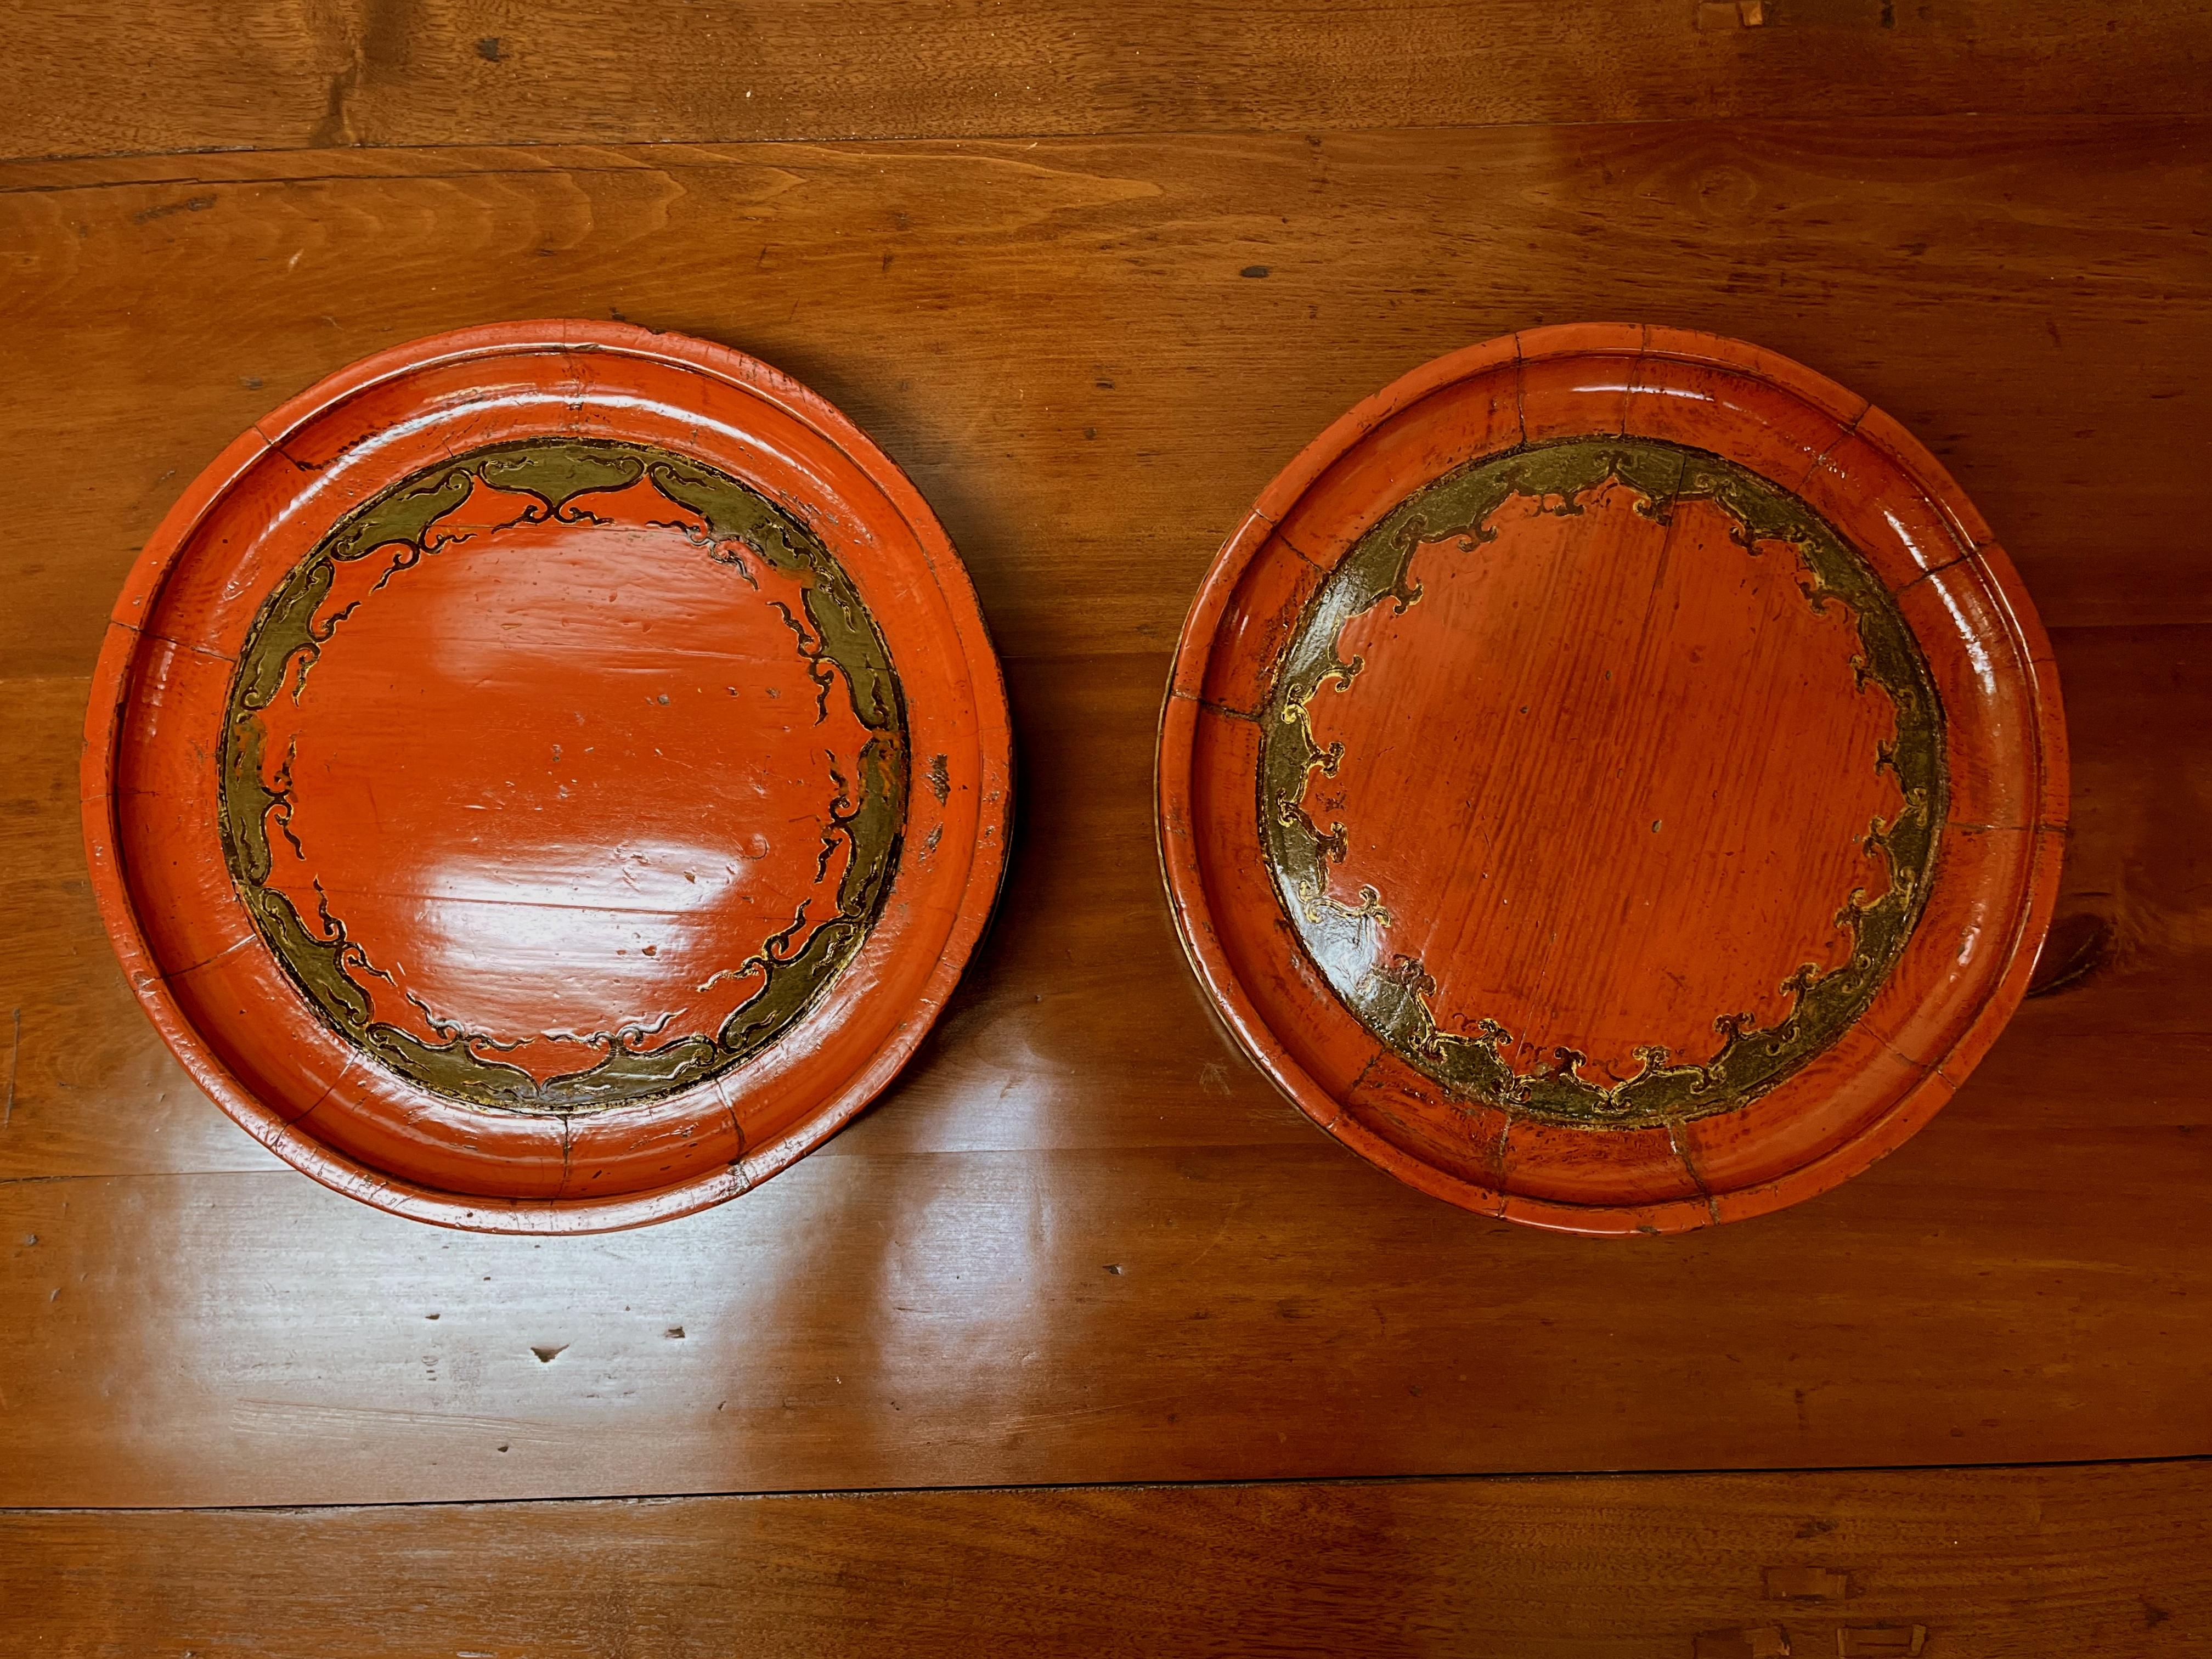 Two Asian Red Lacquer Wedding Round Wooden Plates with Painted Motif for wedding dessert.
They are not match pair, but very similar sizes.
Selling two plates together for the price